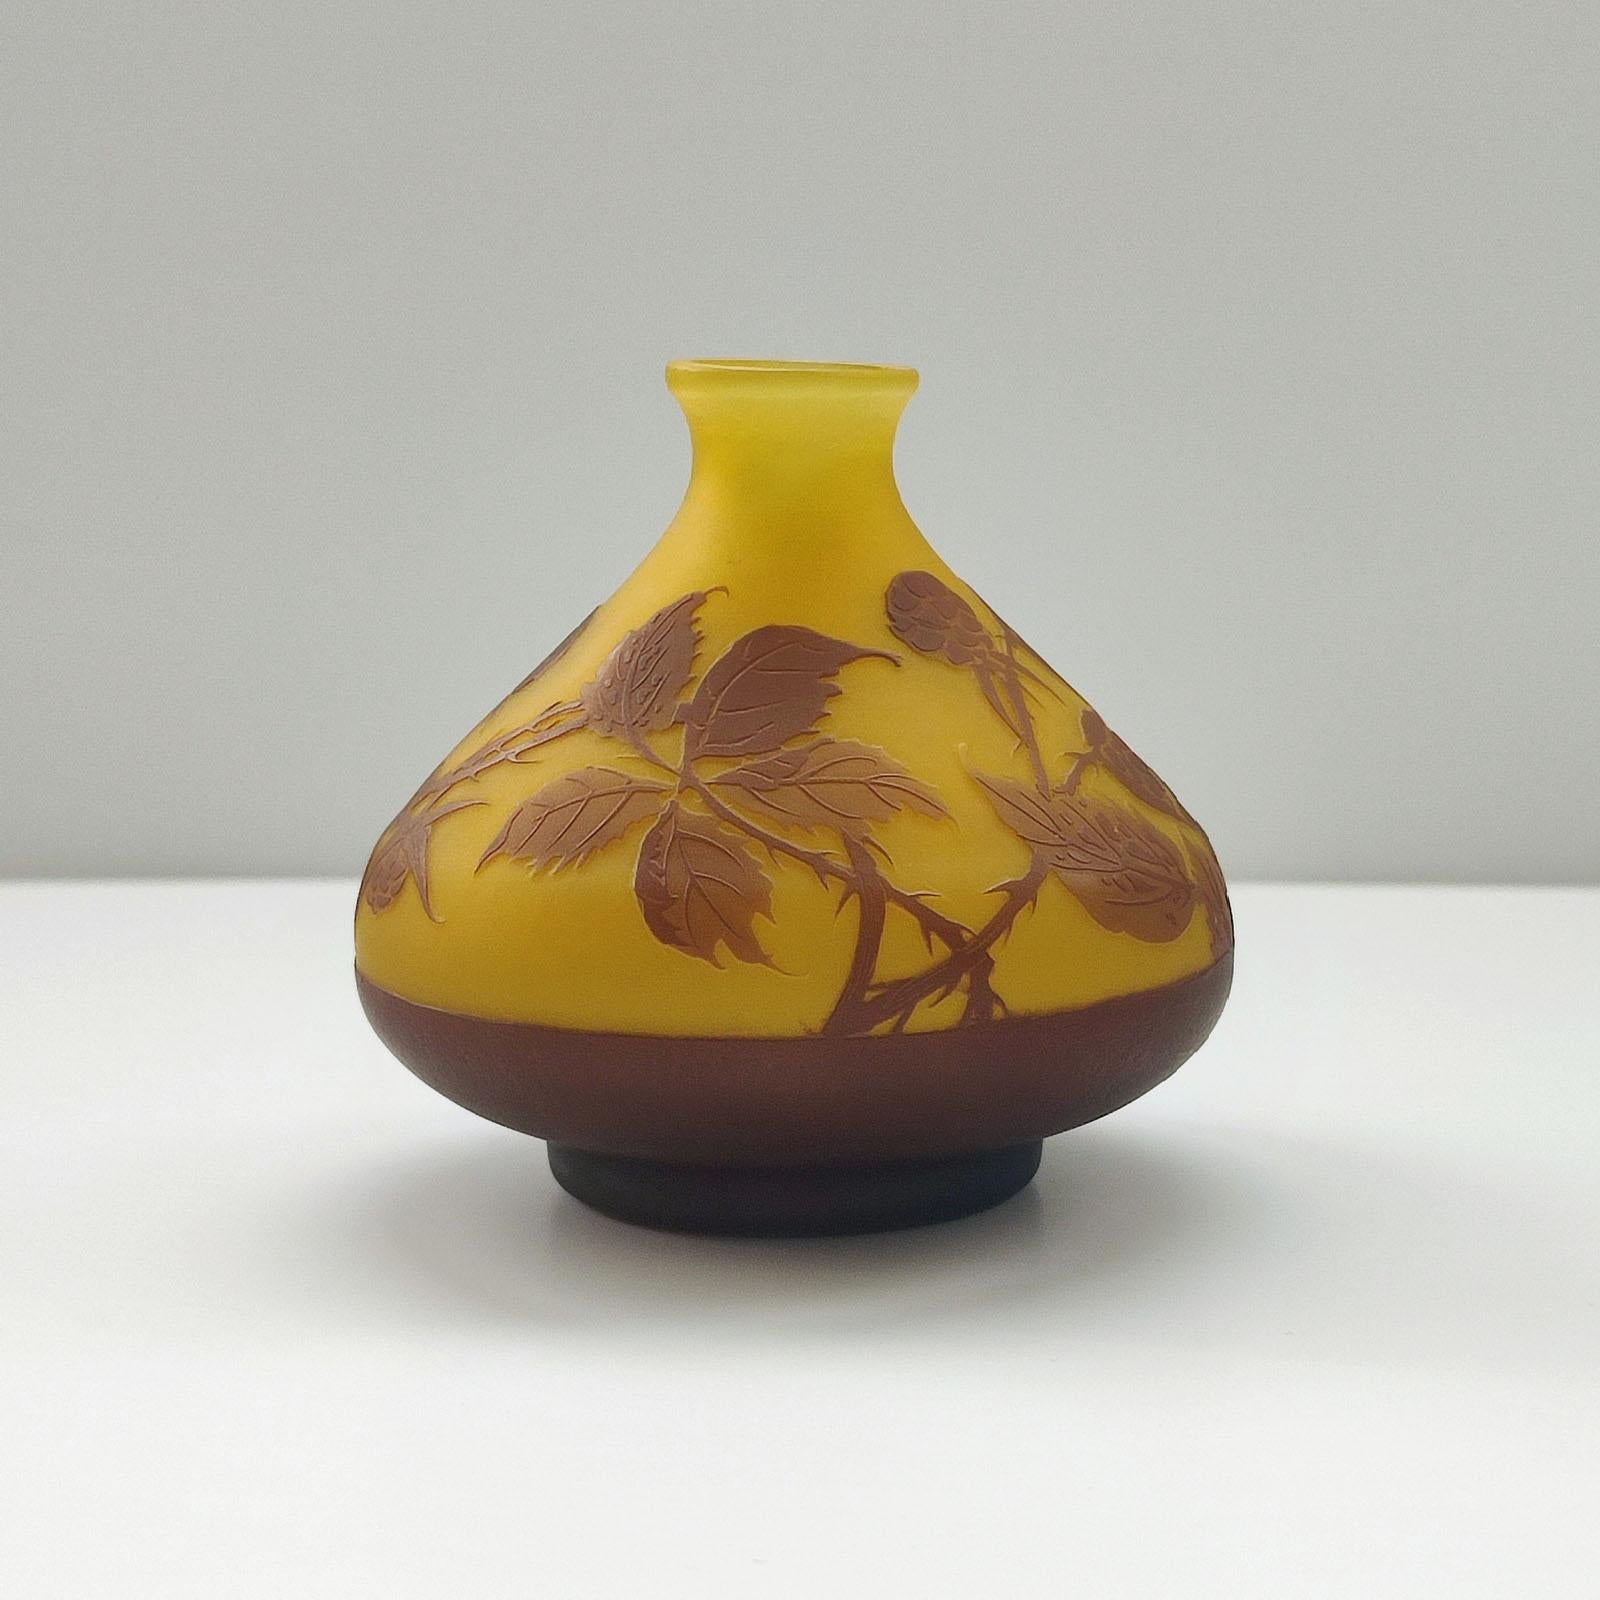 A lovely Art Nouveau vase by Edmond Rigot is a rare find and a must-have for any glass collector.
Inscribed on the wall: E. RiGOT
H: 7.5 cm, Ø 8 cm
From an important private collection.
Highly etched, triangular in section over a stepped, round